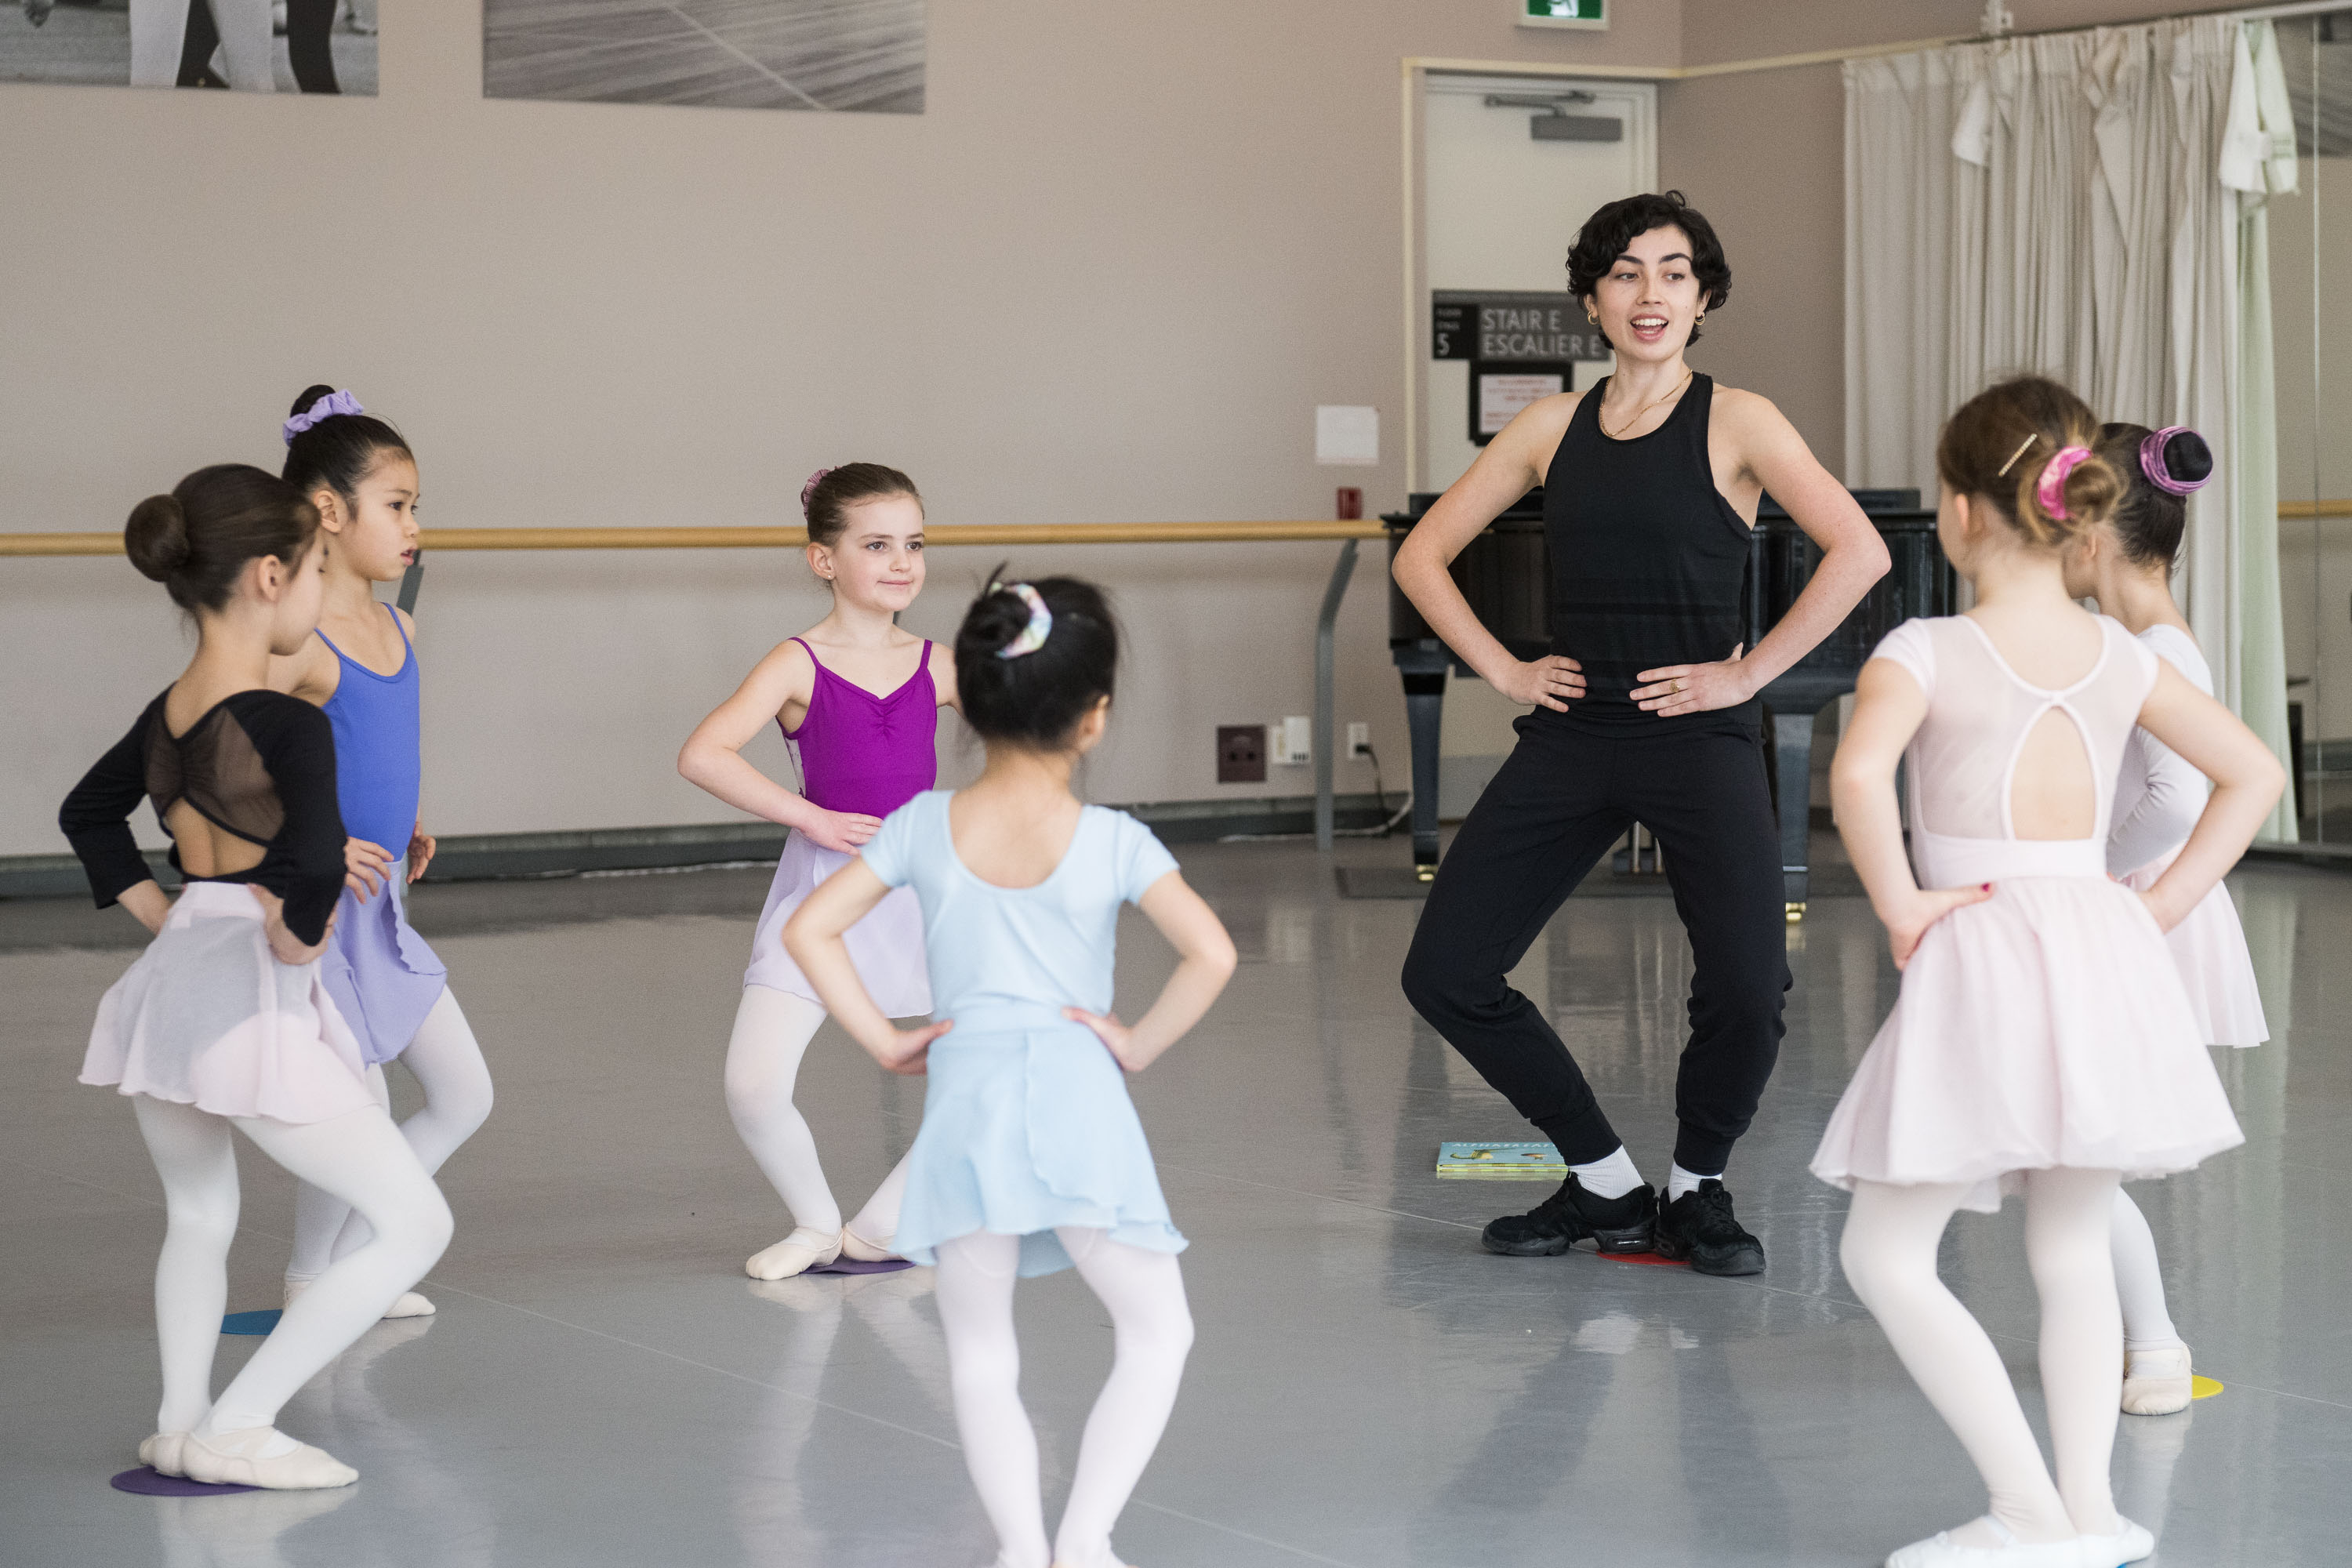 Students of the Young Dancers Program strike a pose in a ballet class.